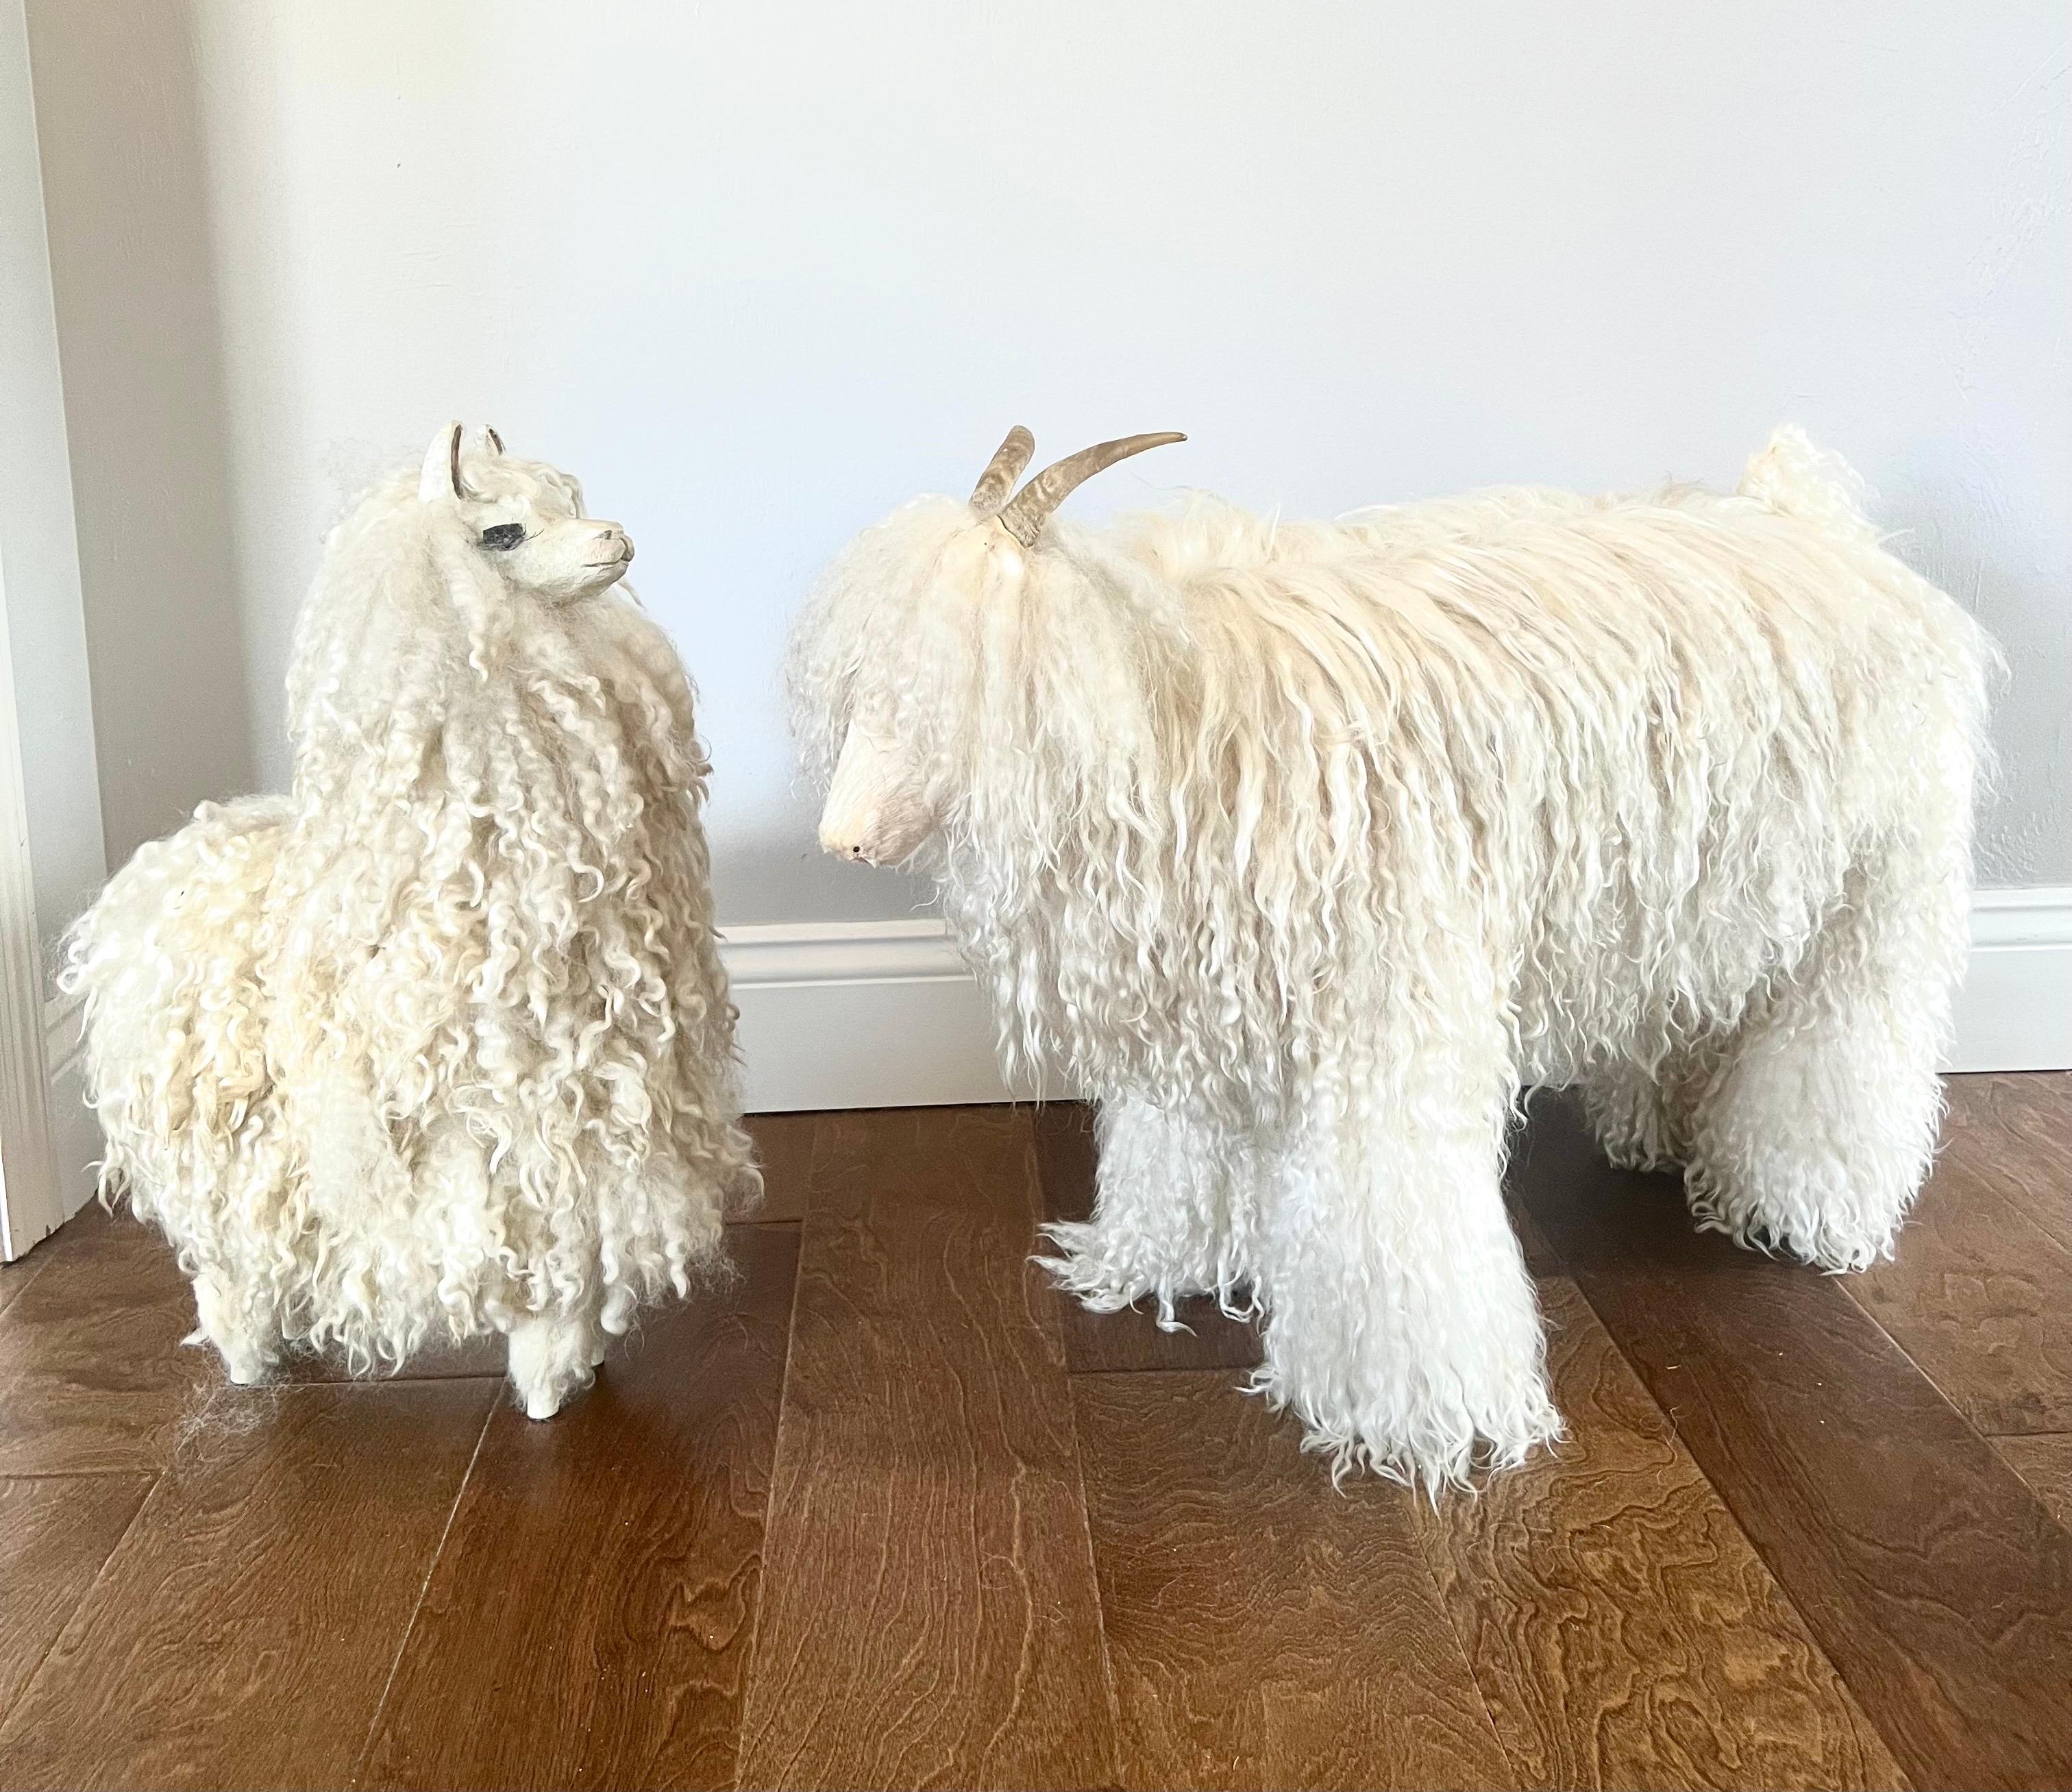 2 Rare French Midcentury Animal Sculptures / Stools or Ottomans. The ensemble is composed of a sheep and a llama sculpture. The sheep and llama sculptures of wood and wool can be used as a footstools or decorative sculptures. 

When Claude and